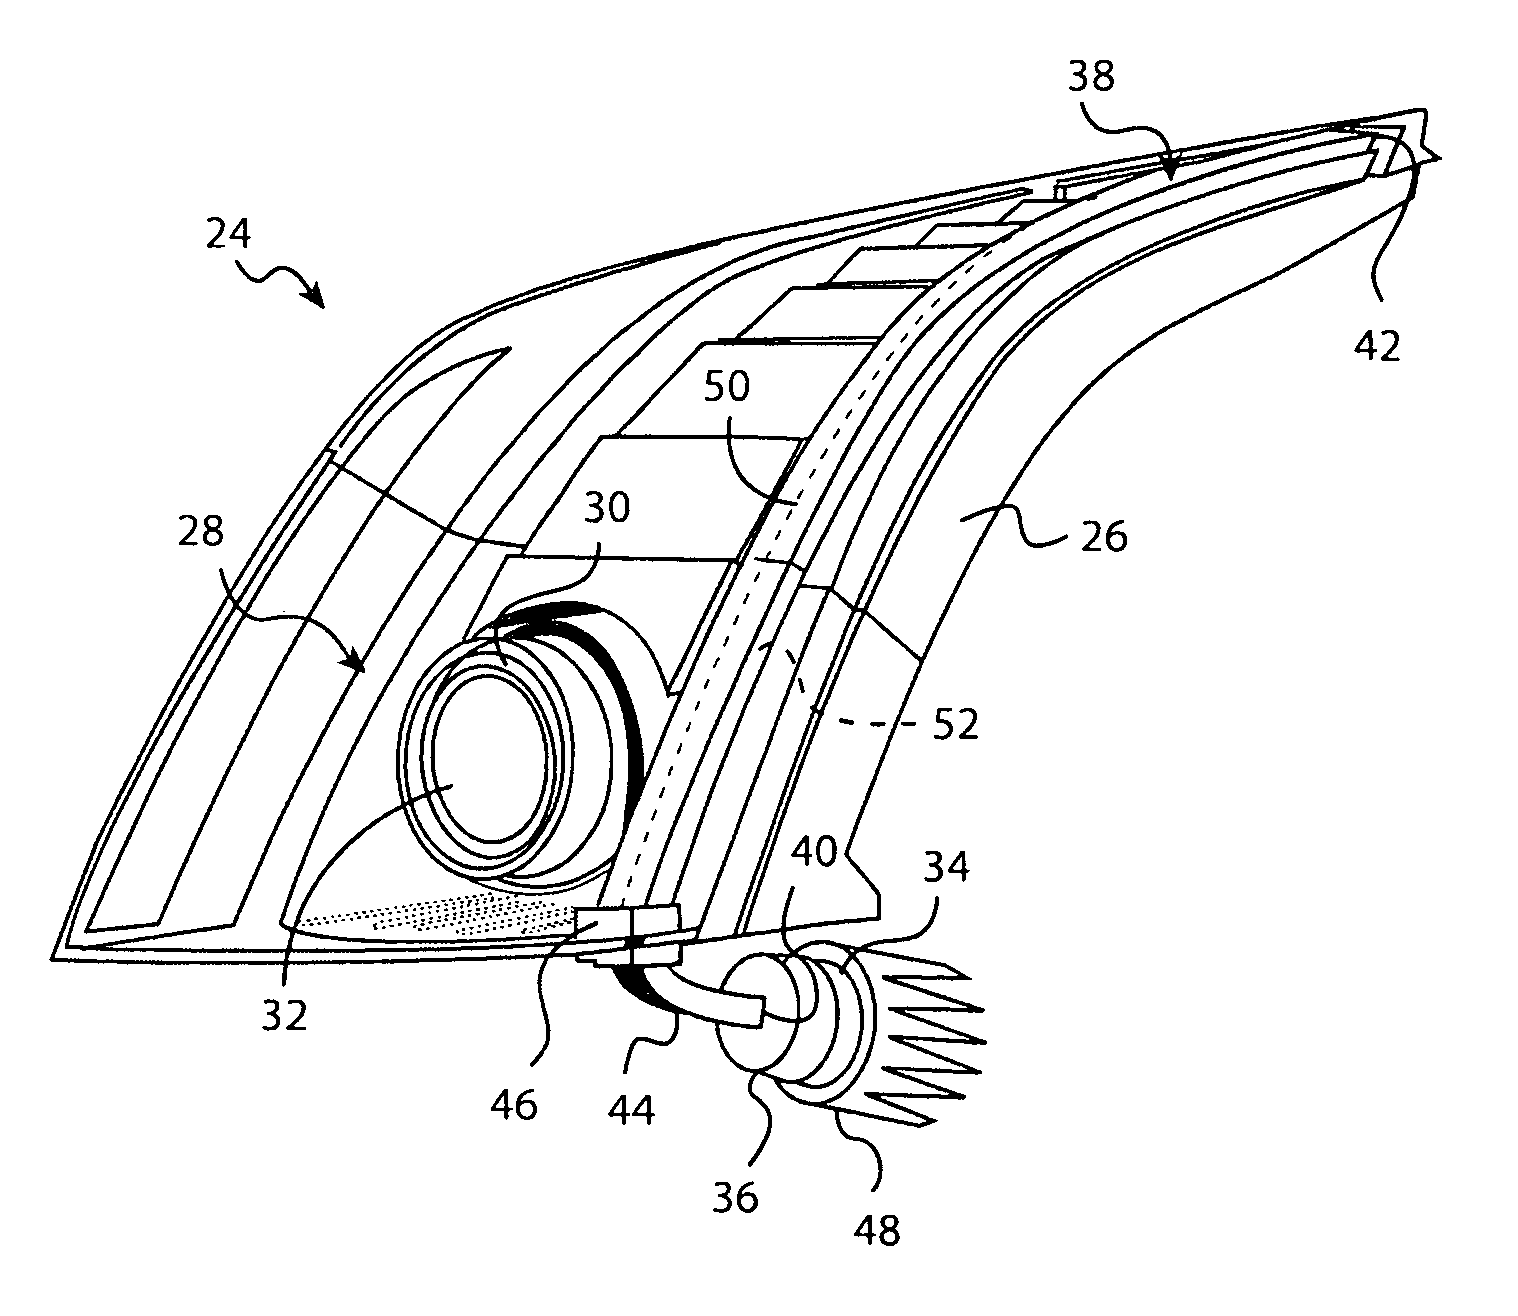 Light guide for vehicle lamp assembly